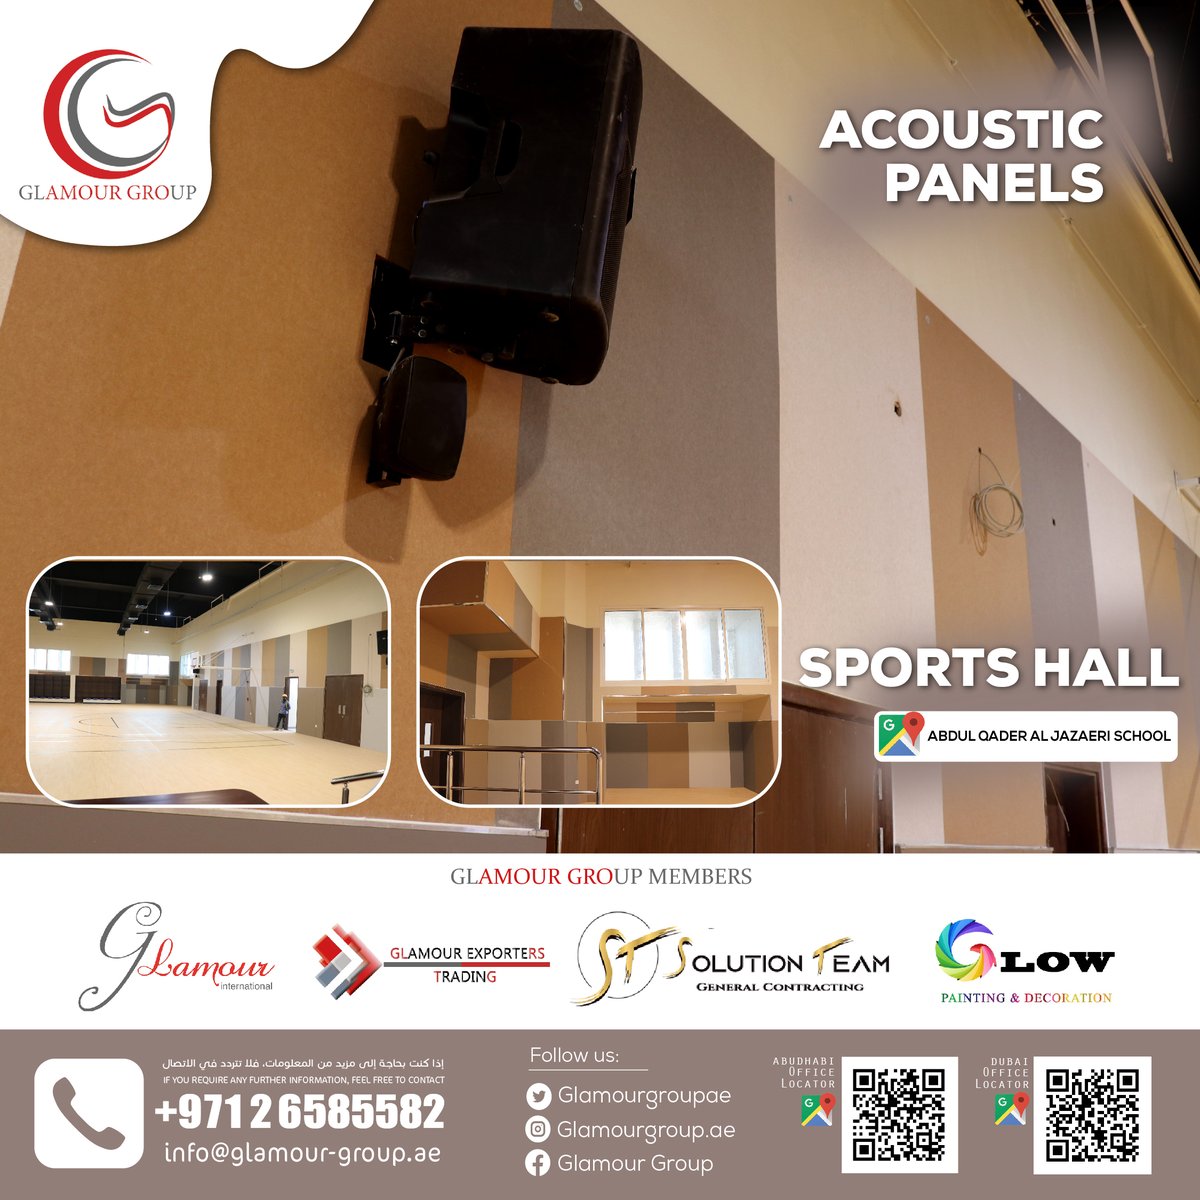 Glamour Group finished installing colorful Acoustic panels in Abdul Qader Al Jazaeri School 

to enjoy our services call our office at 📞 +971 2 6585582 or drop an inquiry at 📧 info@glamour-group.ae, we'll be happy to contact you!

#uae #إماراتي  #acousticpanel #Acousticwall